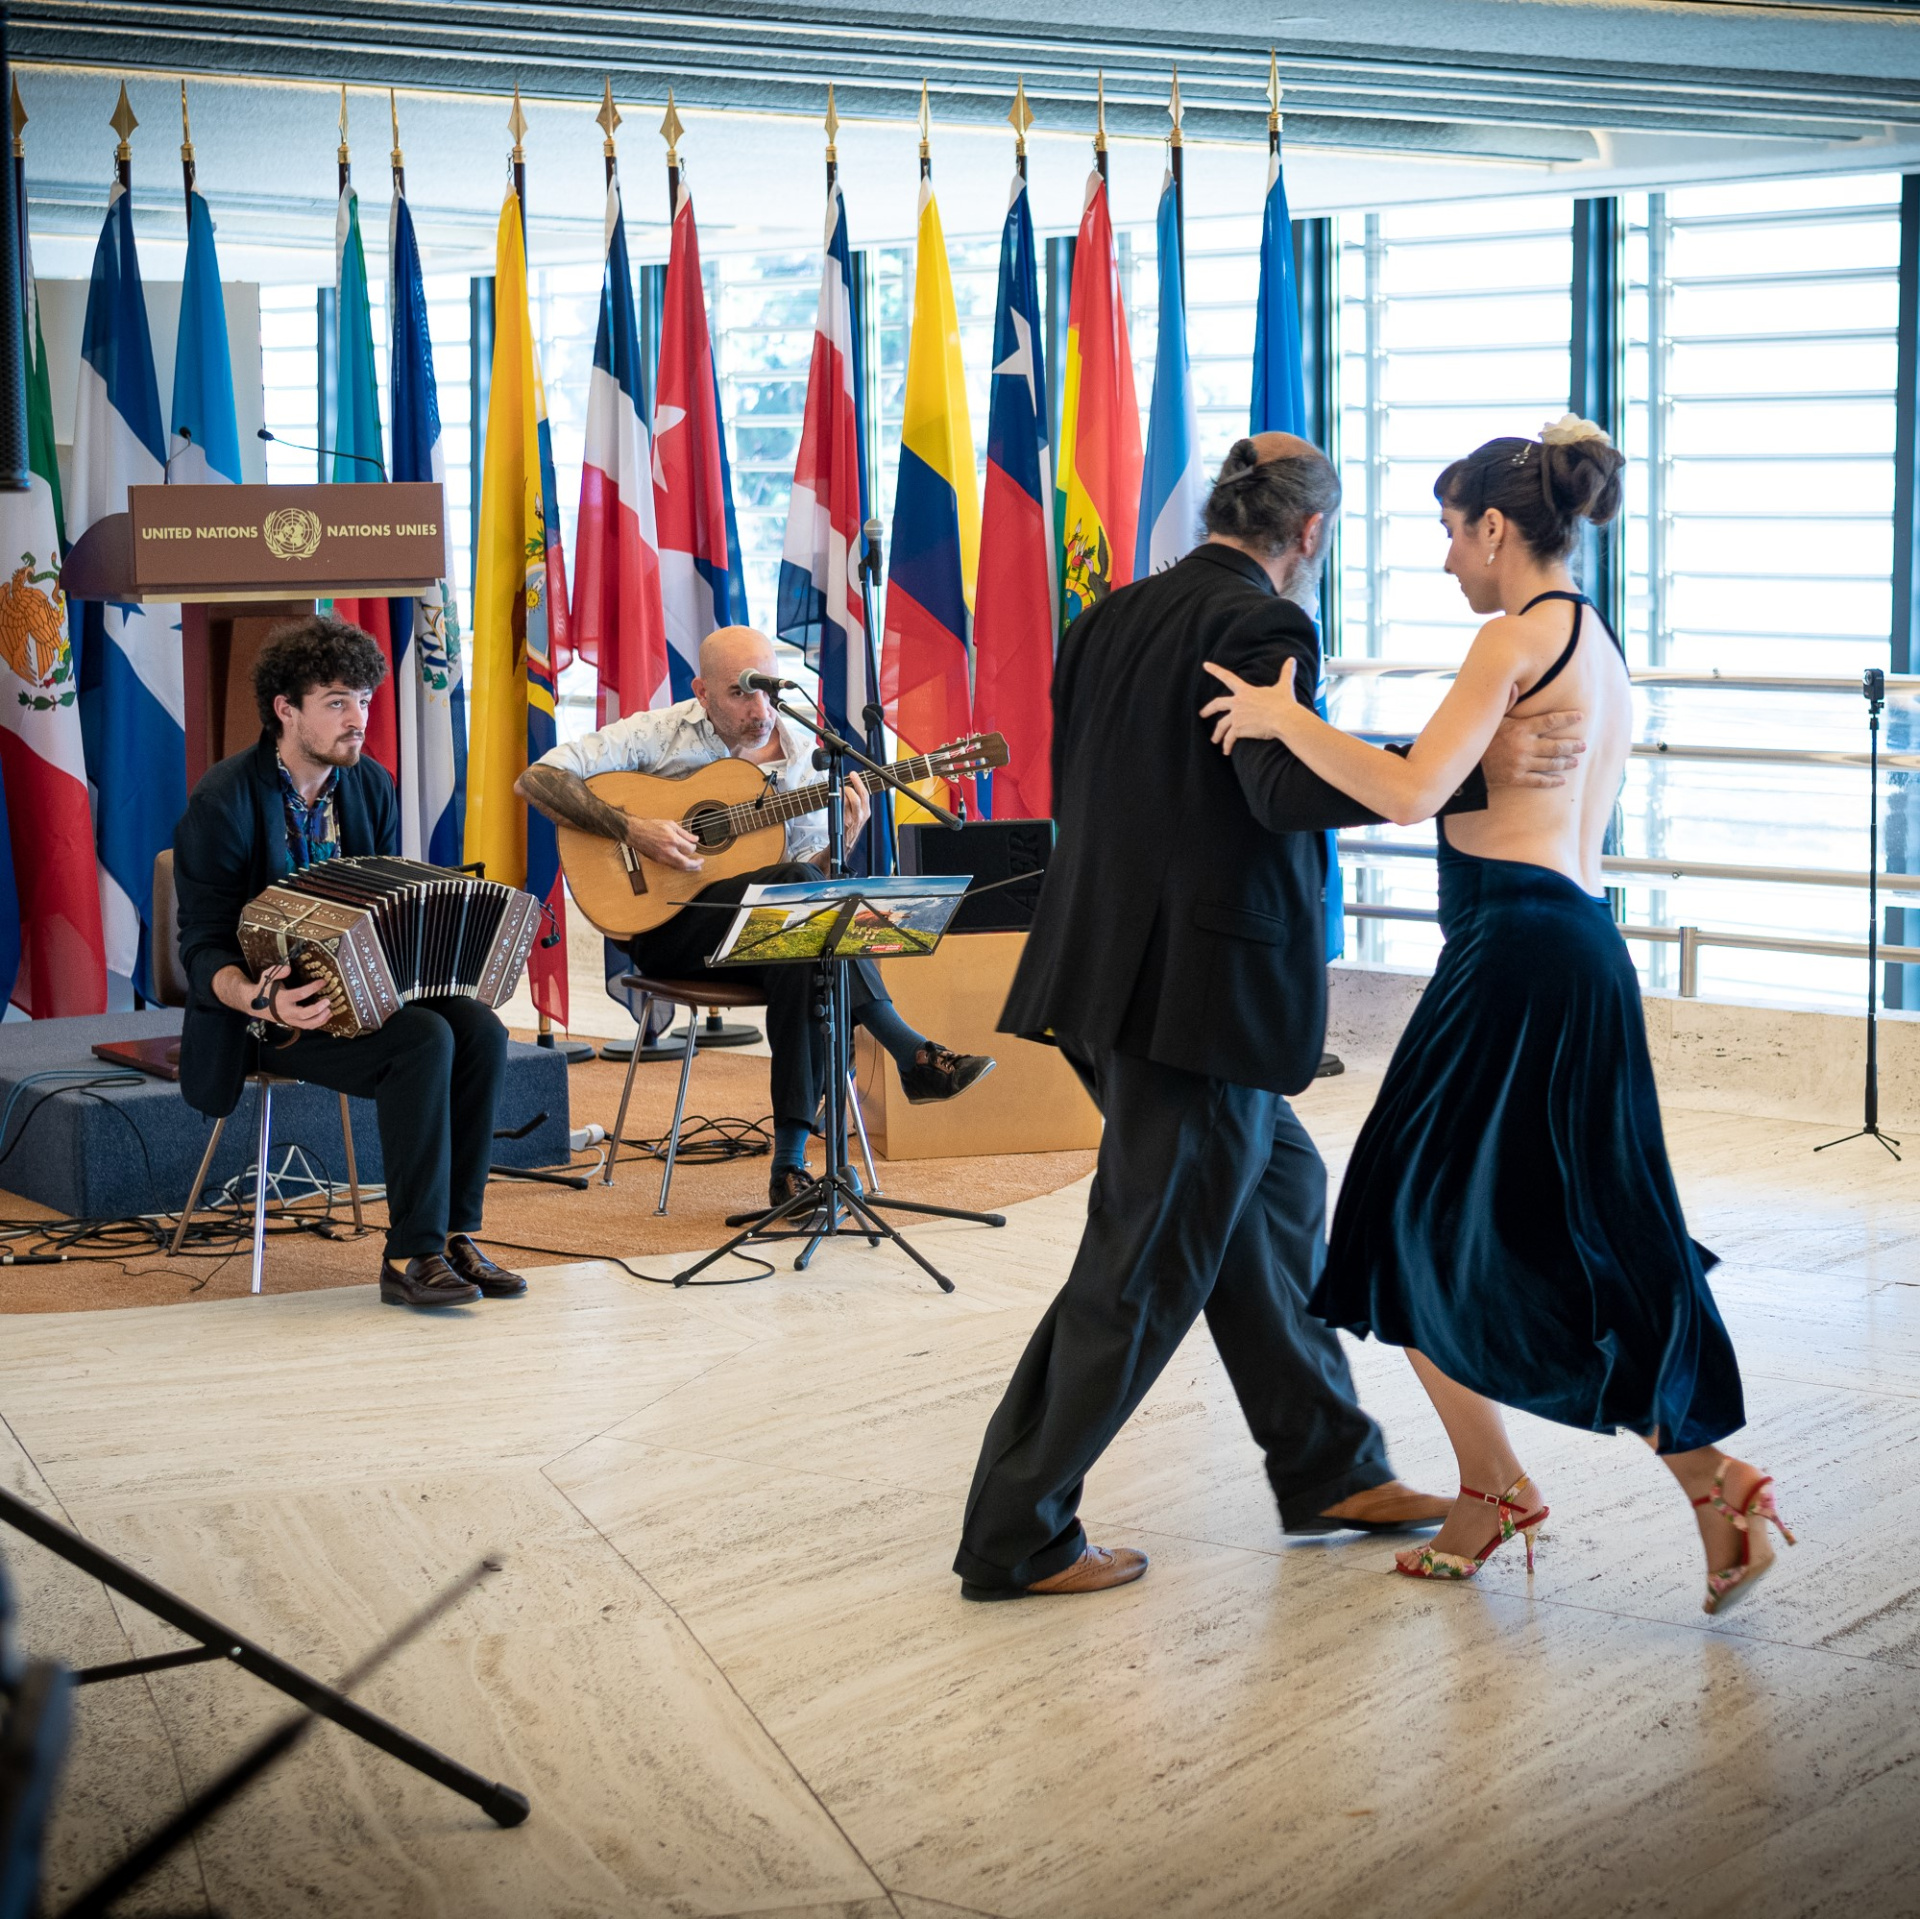 Two tango dancers perform in a brightly lit room at UN Geneva.